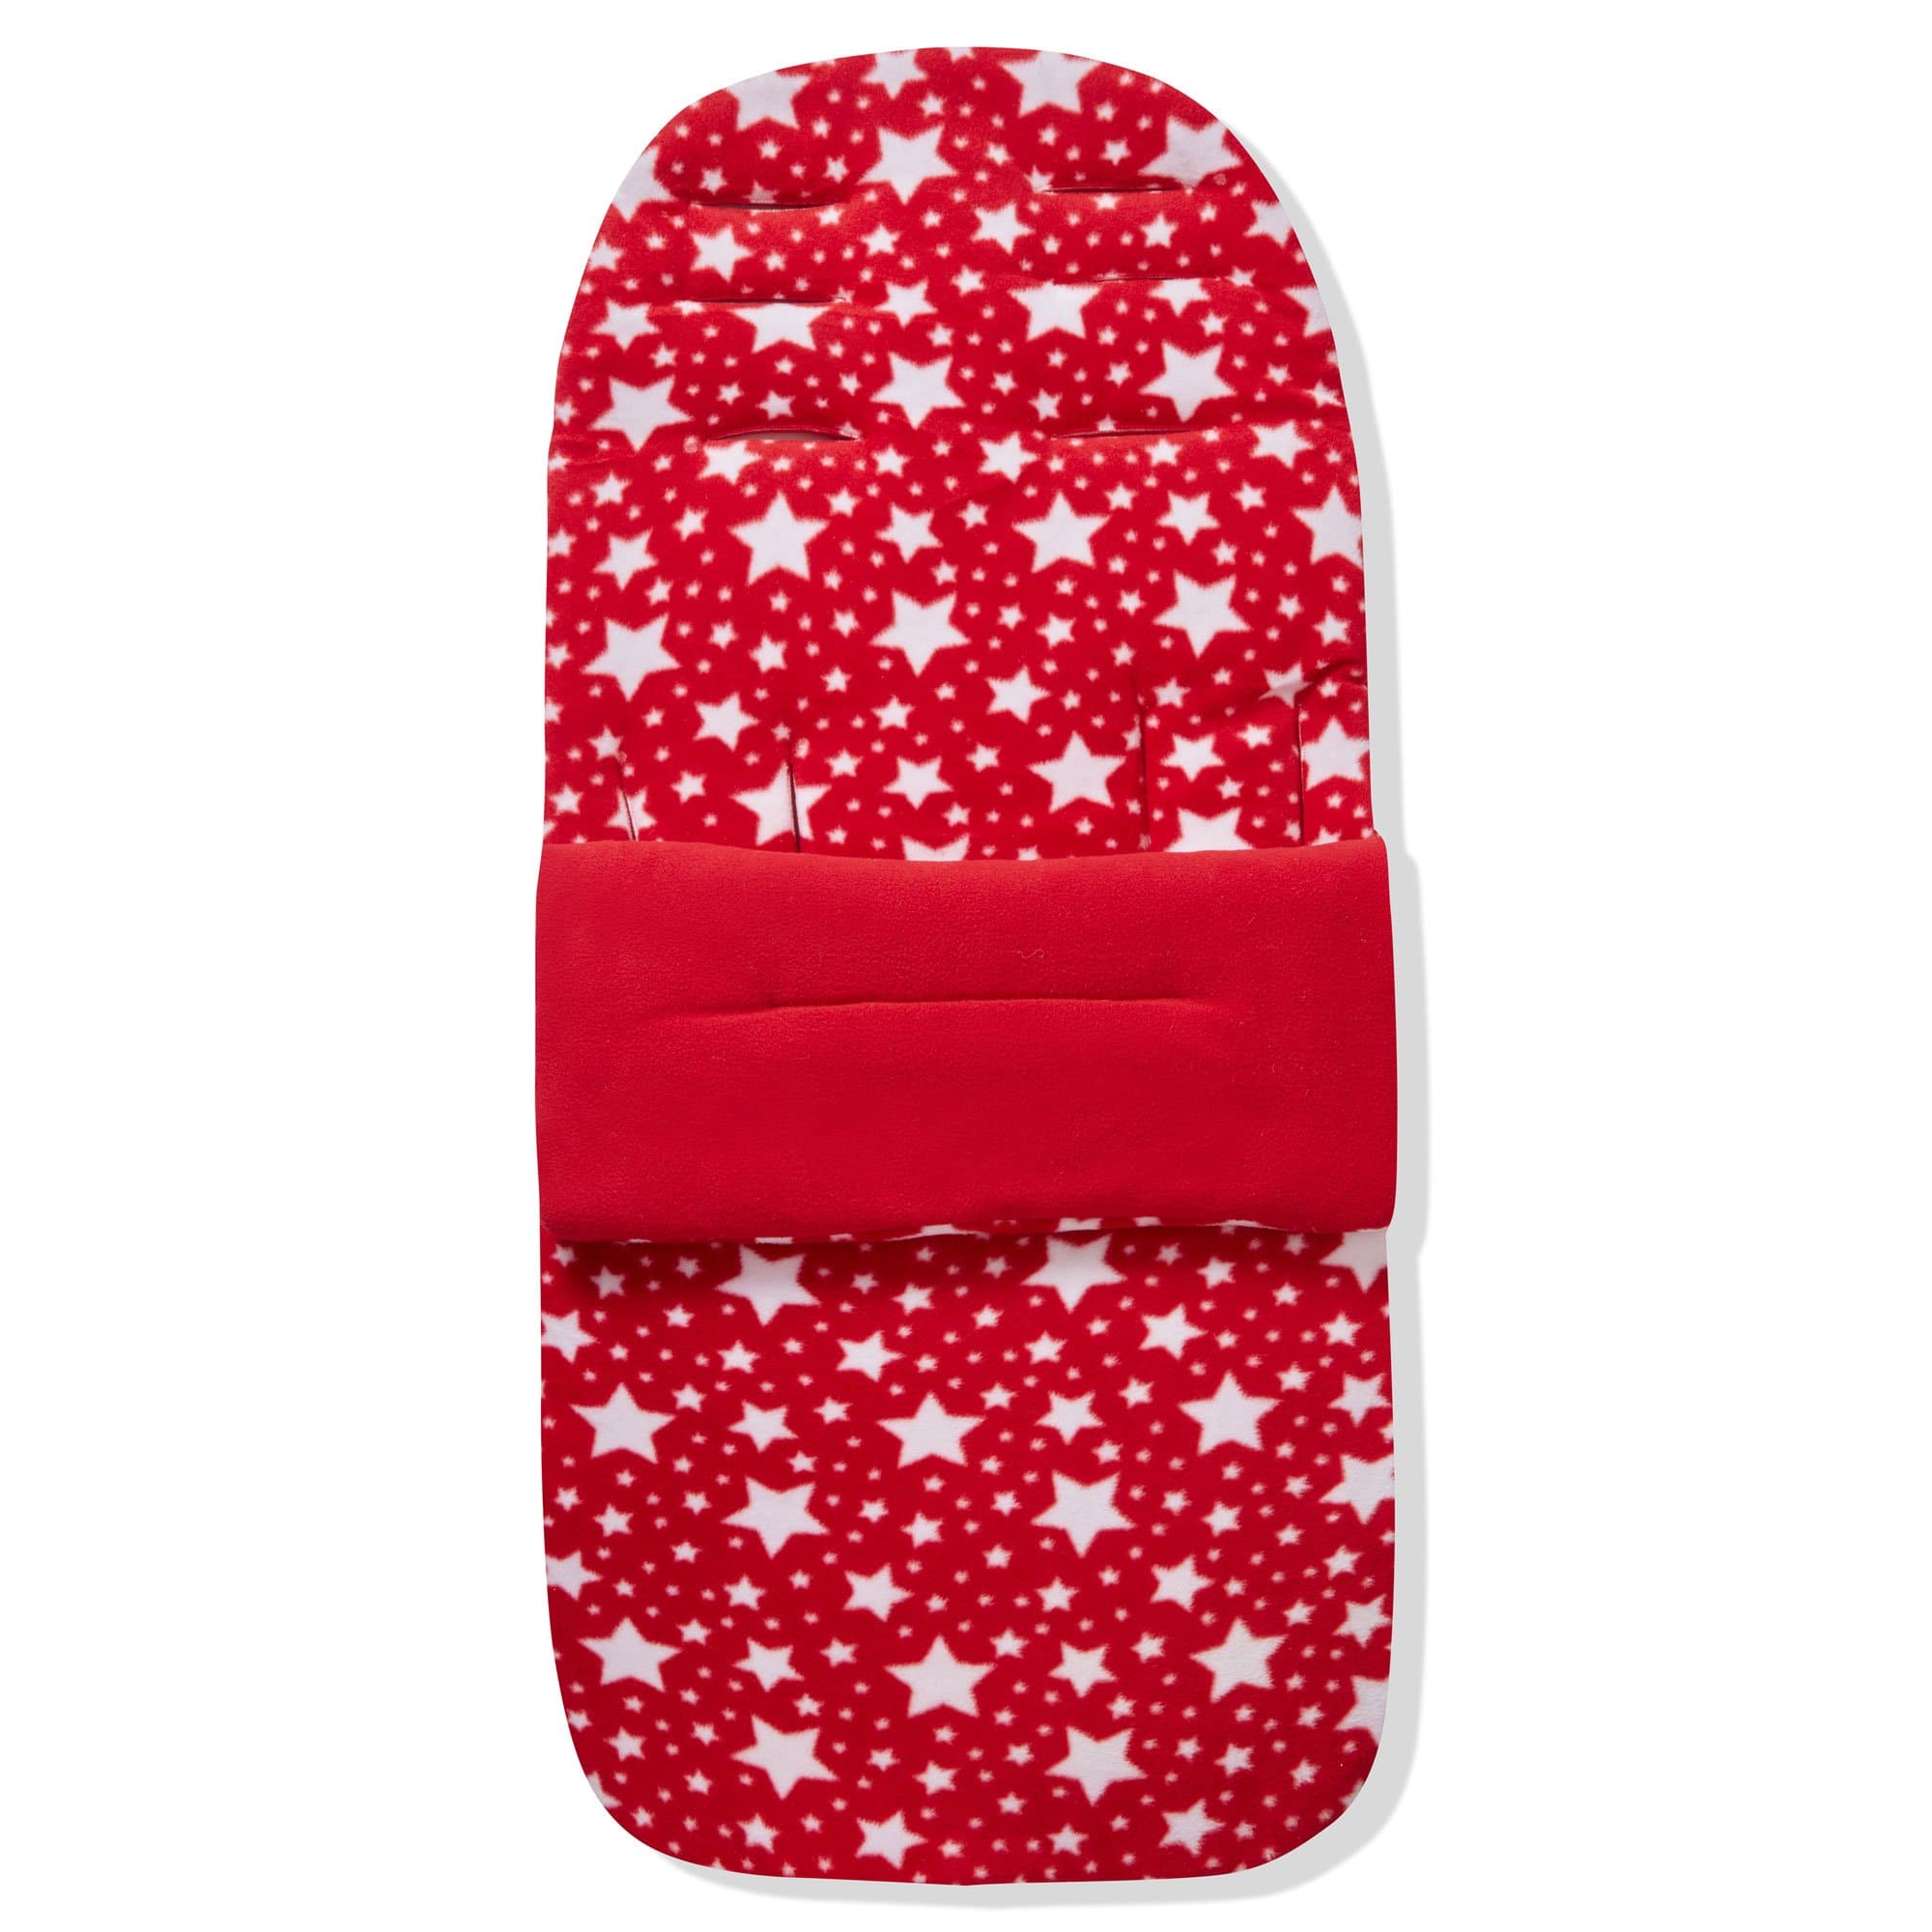 Fleece Footmuff / Cosy Toes Compatible with BabiesRus - Red Star / Fits All Models | For Your Little One